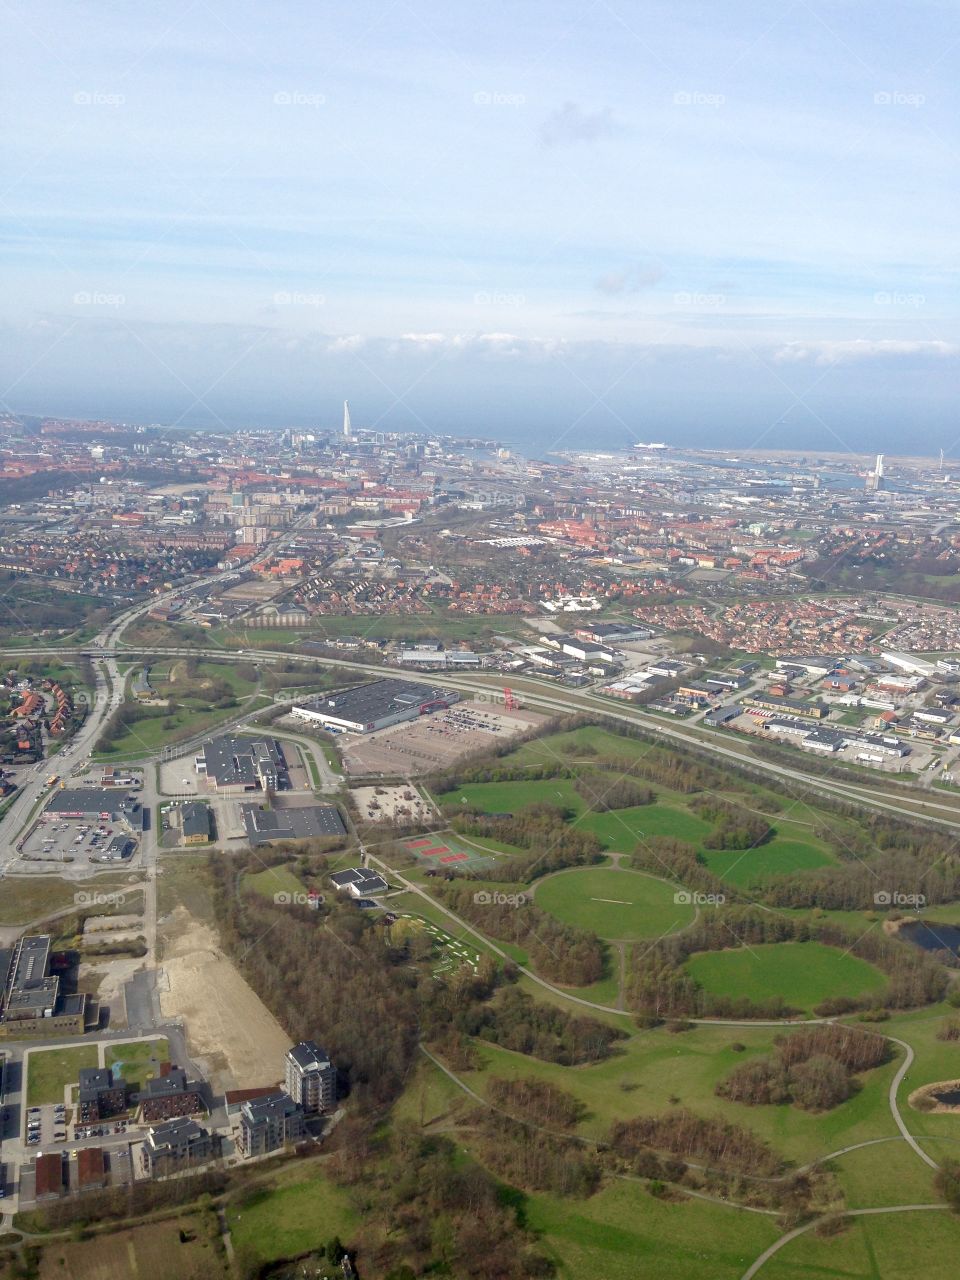 City of Malmö from above. 
Taken from helicopter. 